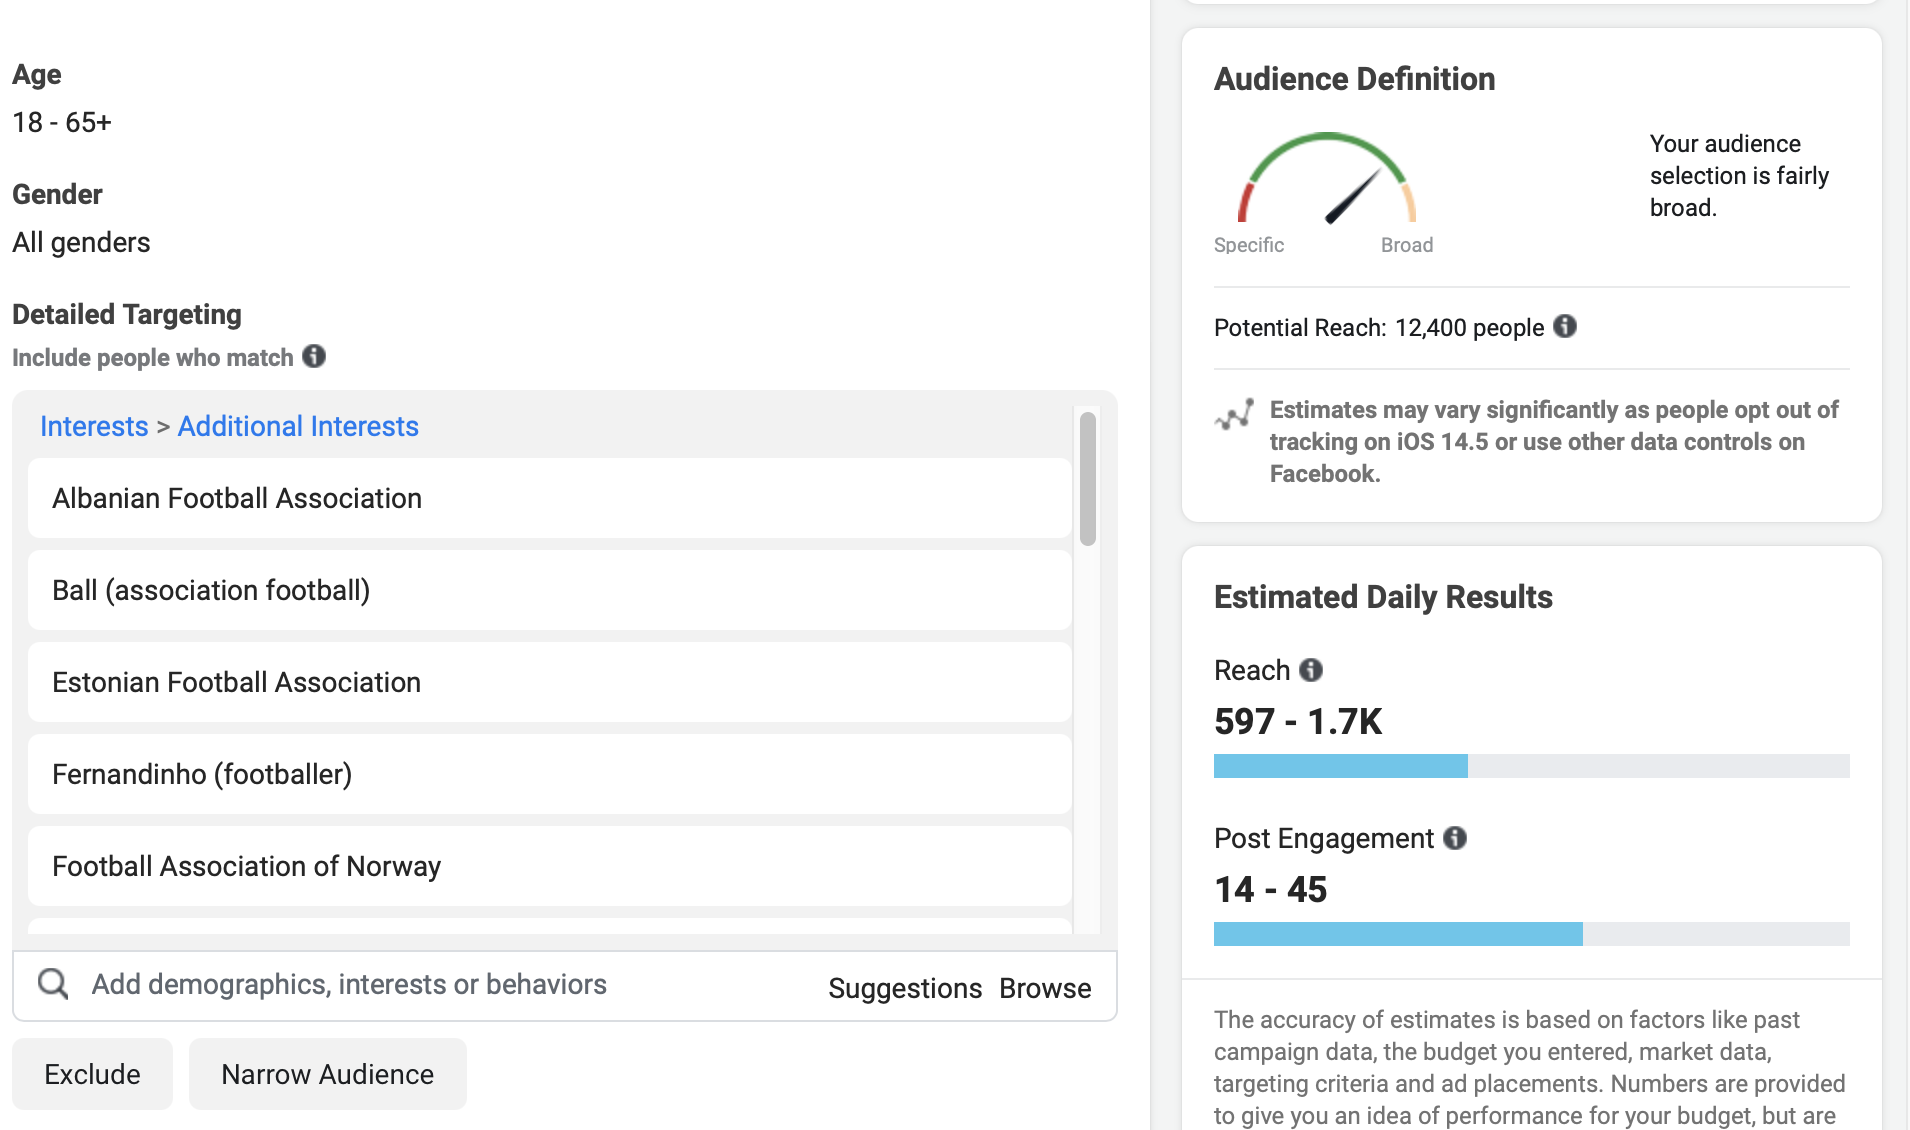 interestinsights interests added to detailed targeting